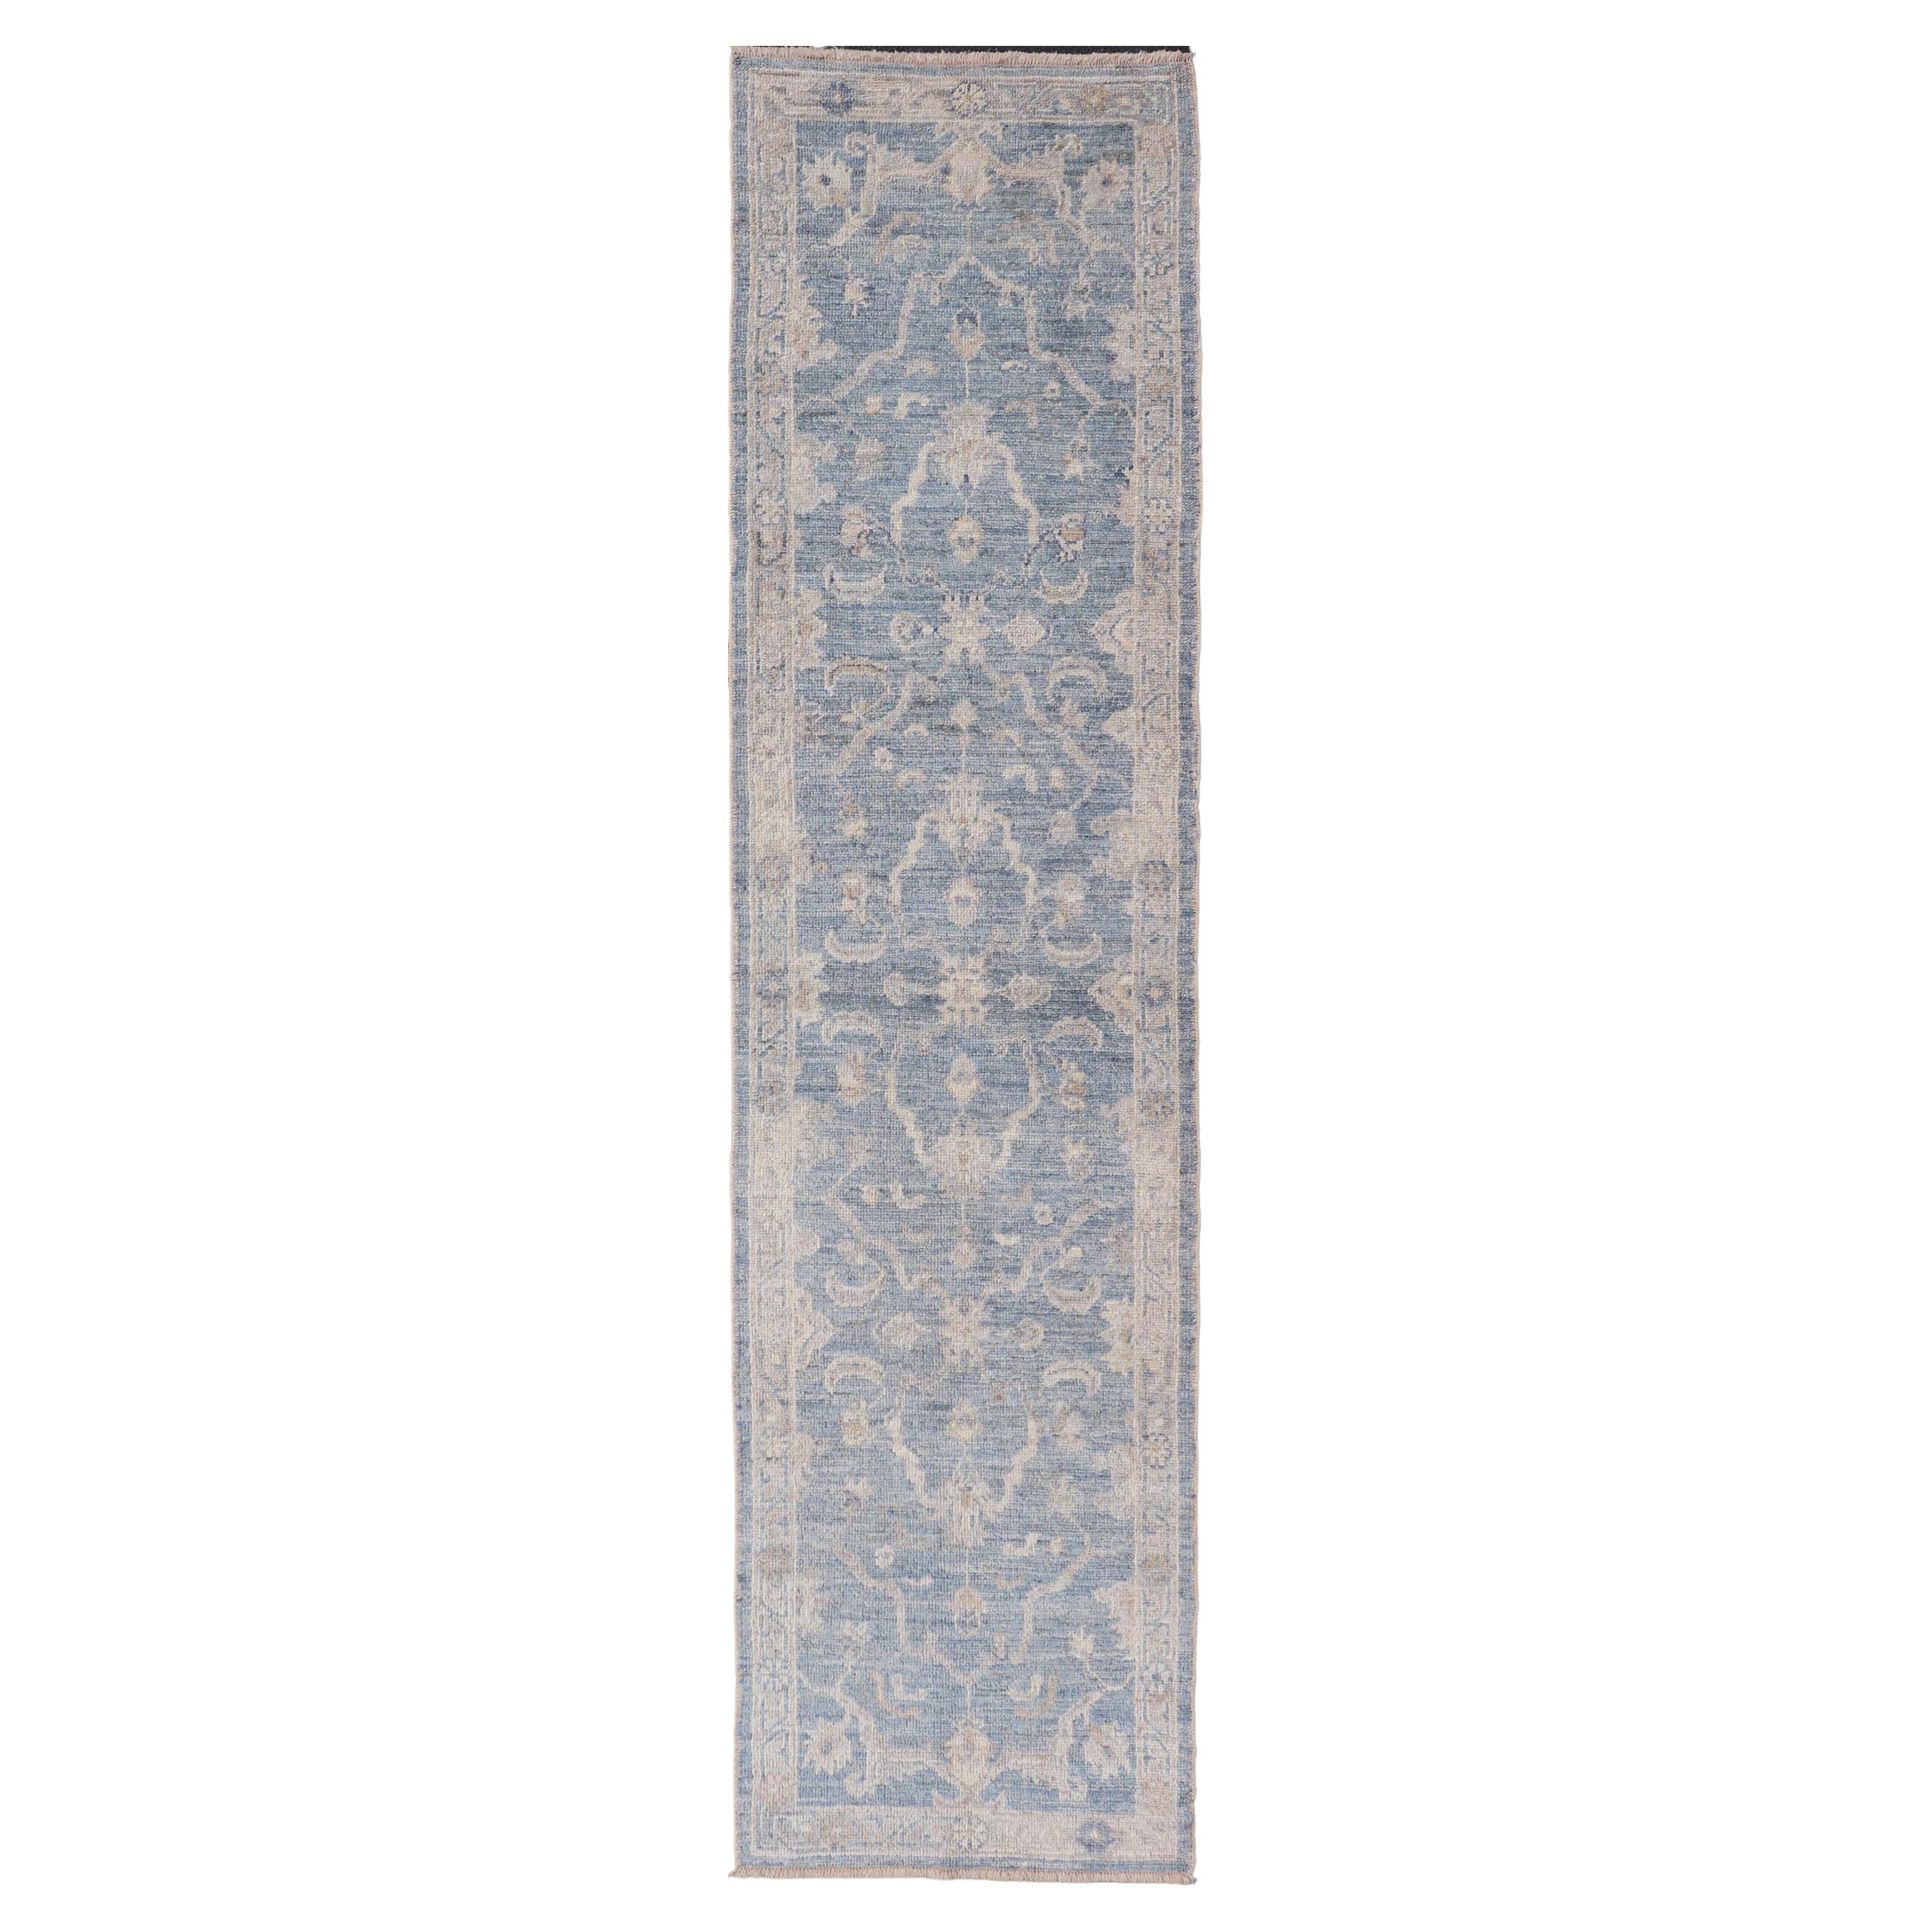 Angora Turkish Oushak Runner with Floral Design and Medium Blue and Gray Border For Sale